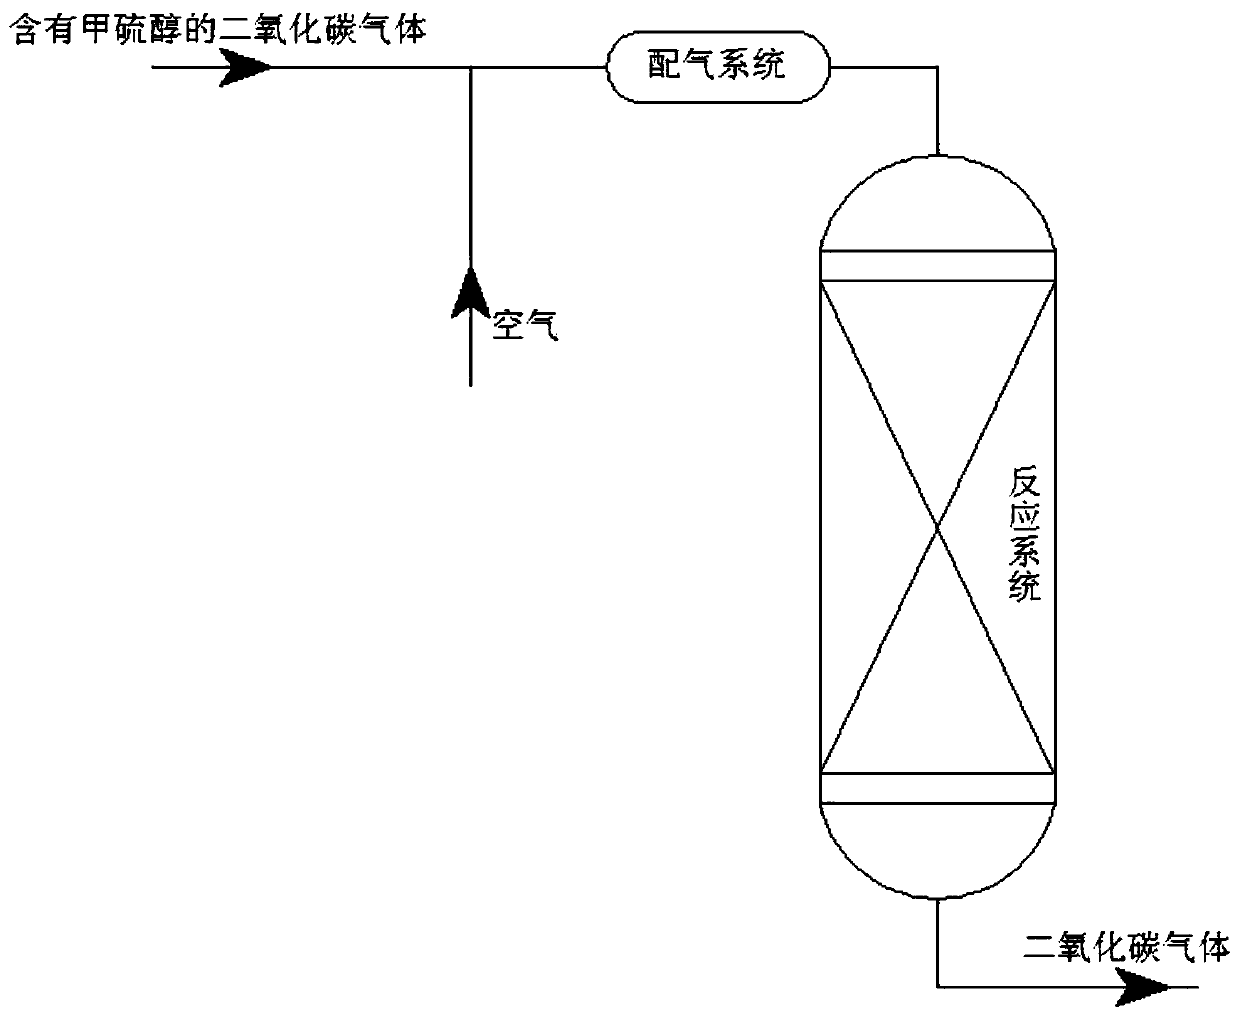 Process for removing methyl mercaptan from carbon dioxide gas